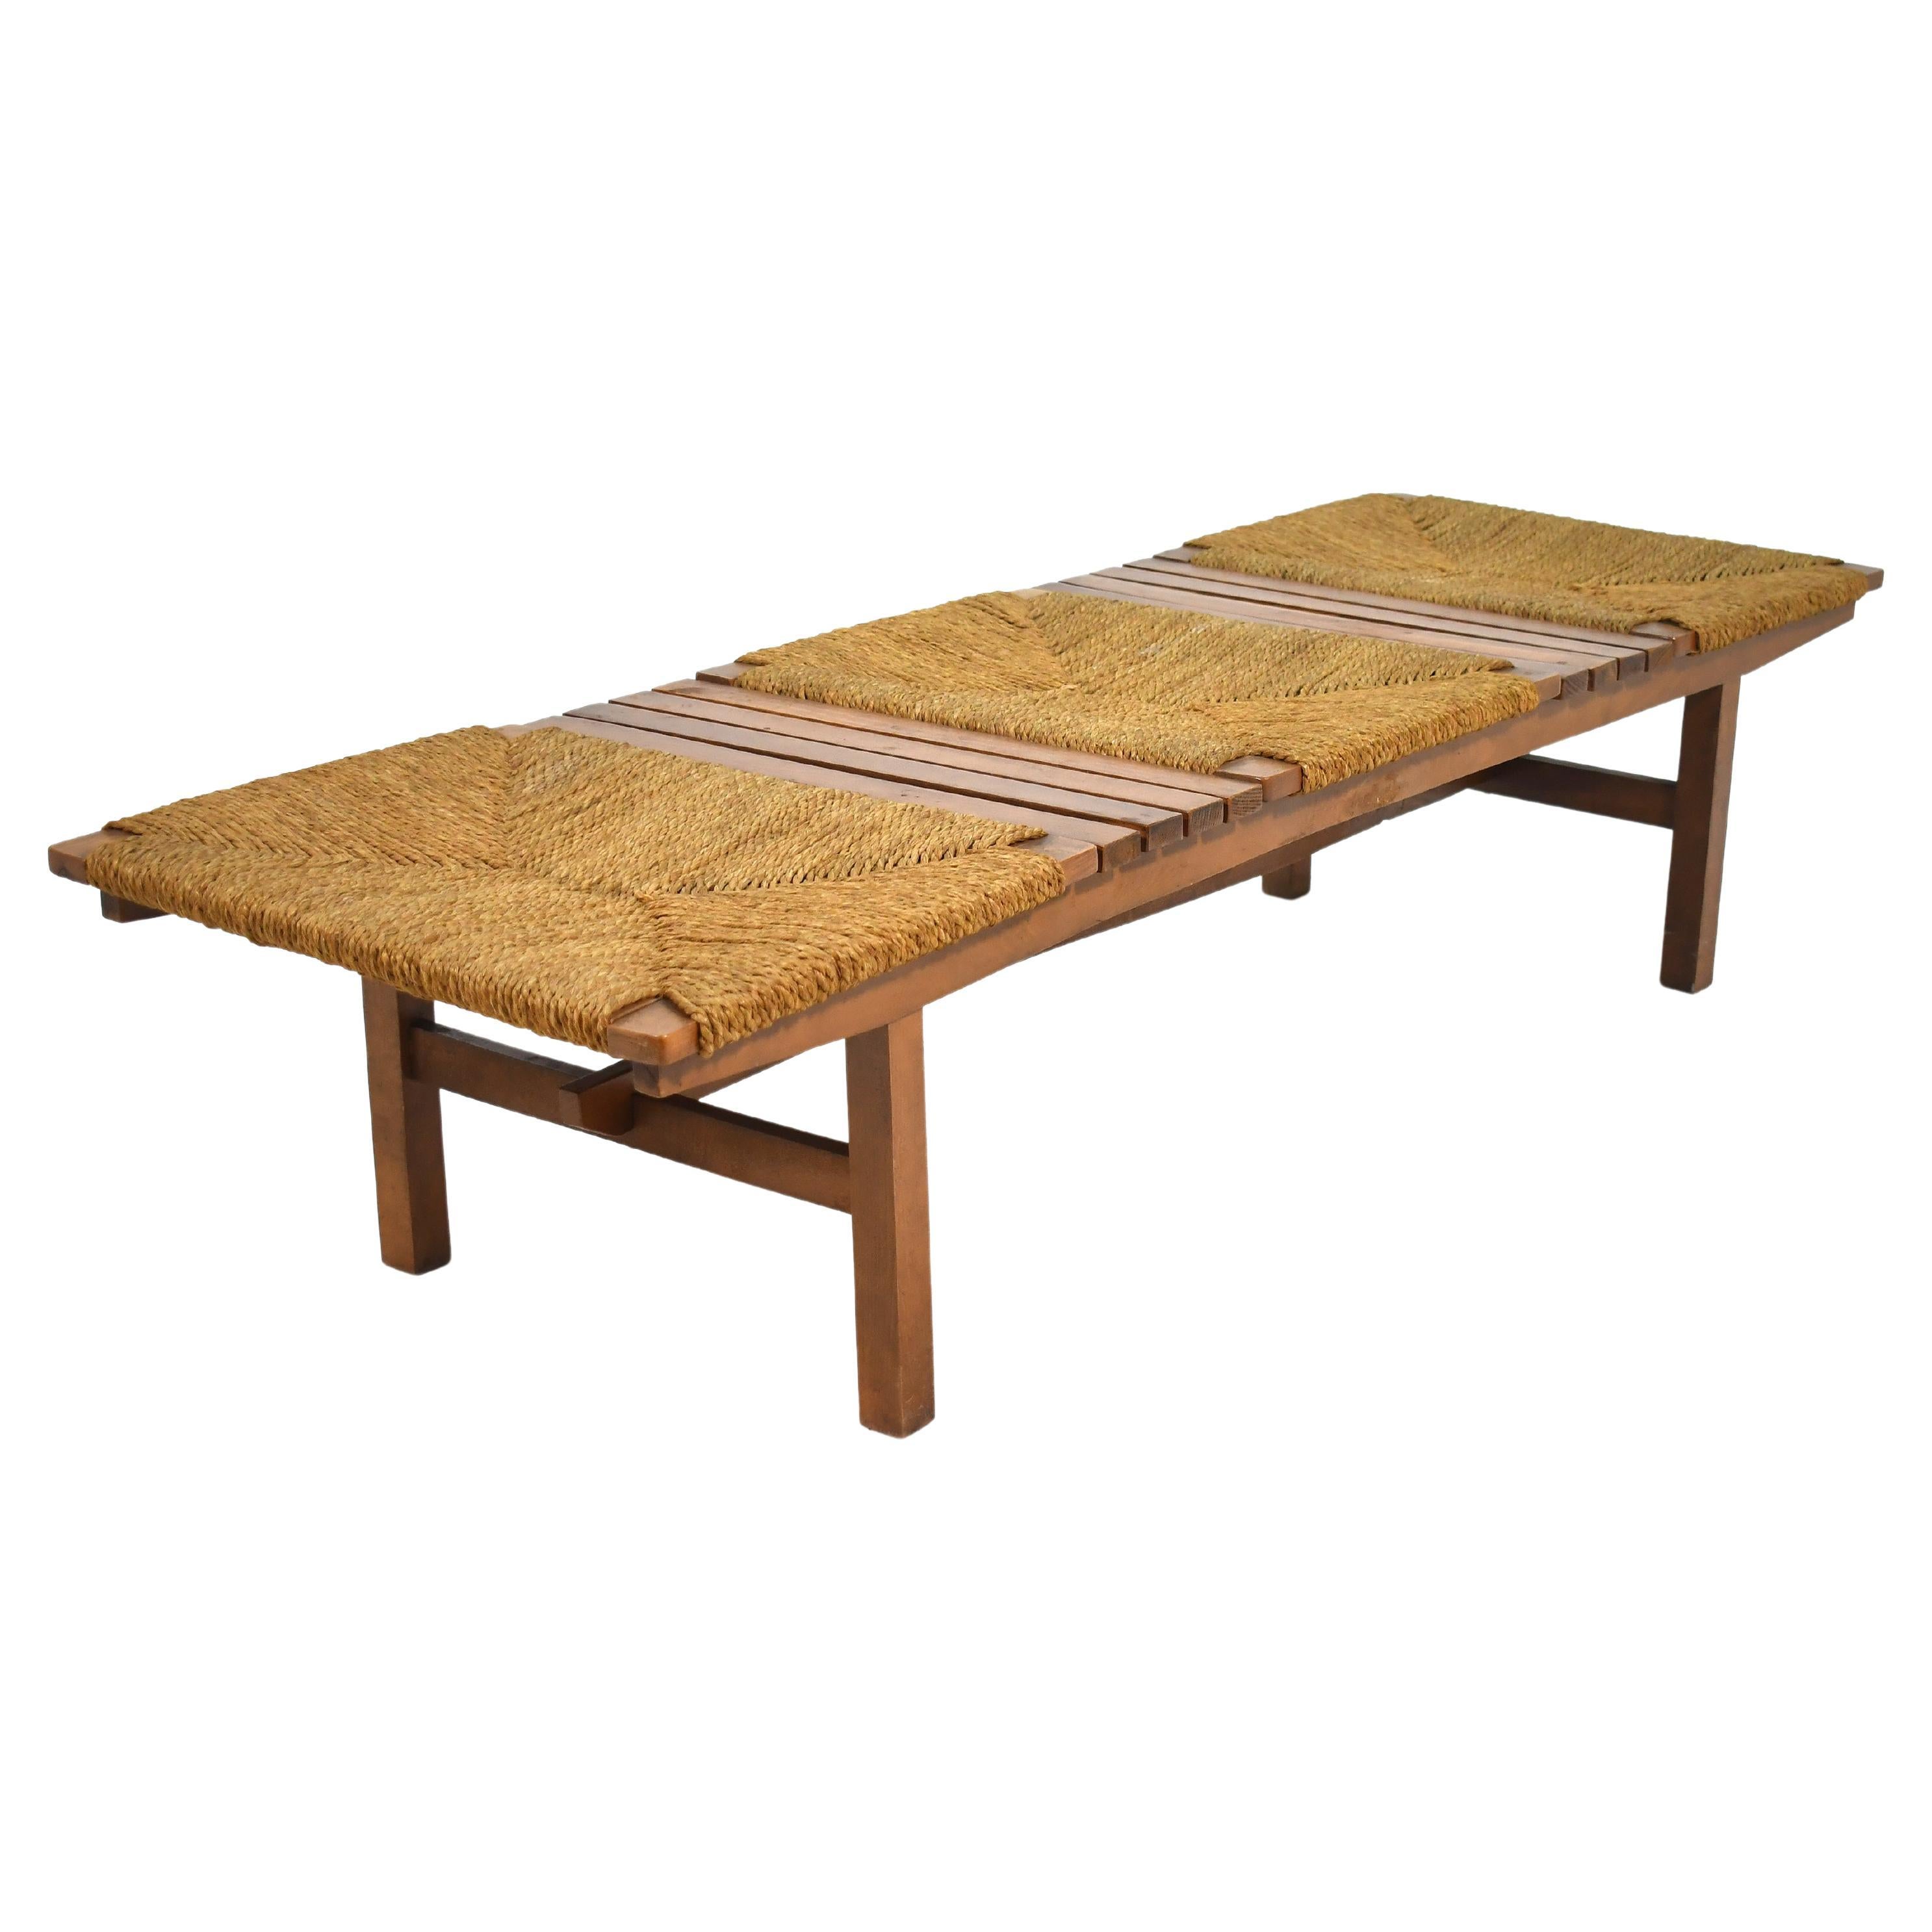 Japanese Bench For Sale